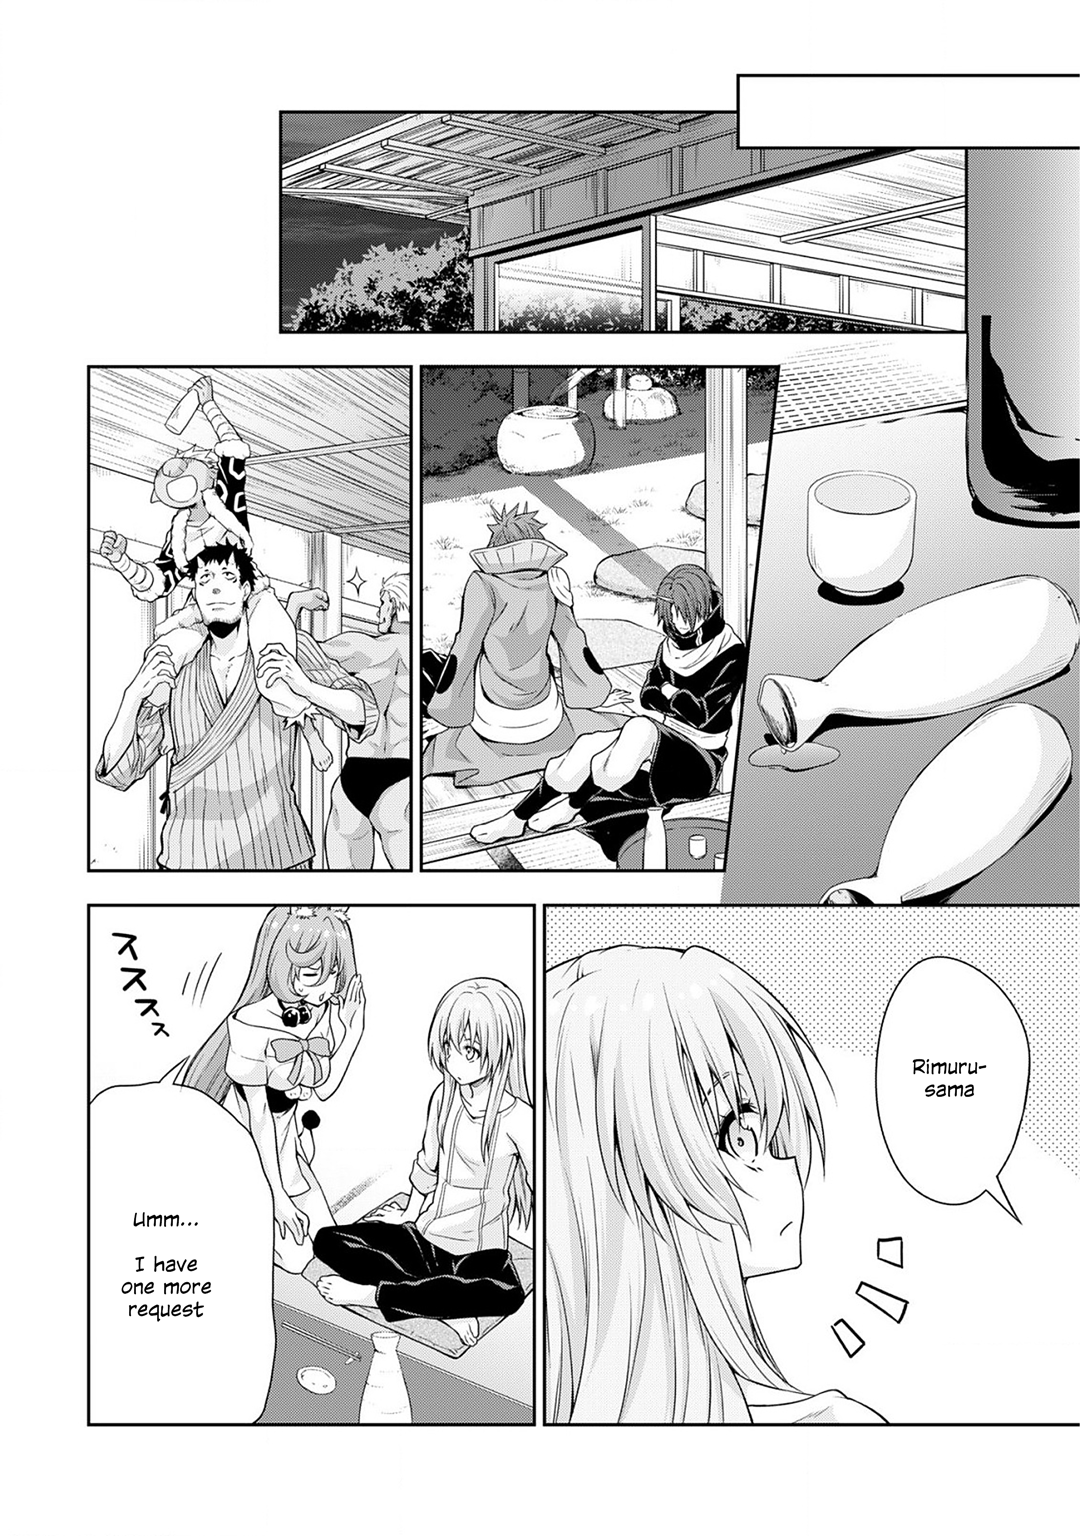 Tensei Shitara Slime Datta Ken: The Ways Of Strolling In The Demon Country Vol.7 Chapter 35